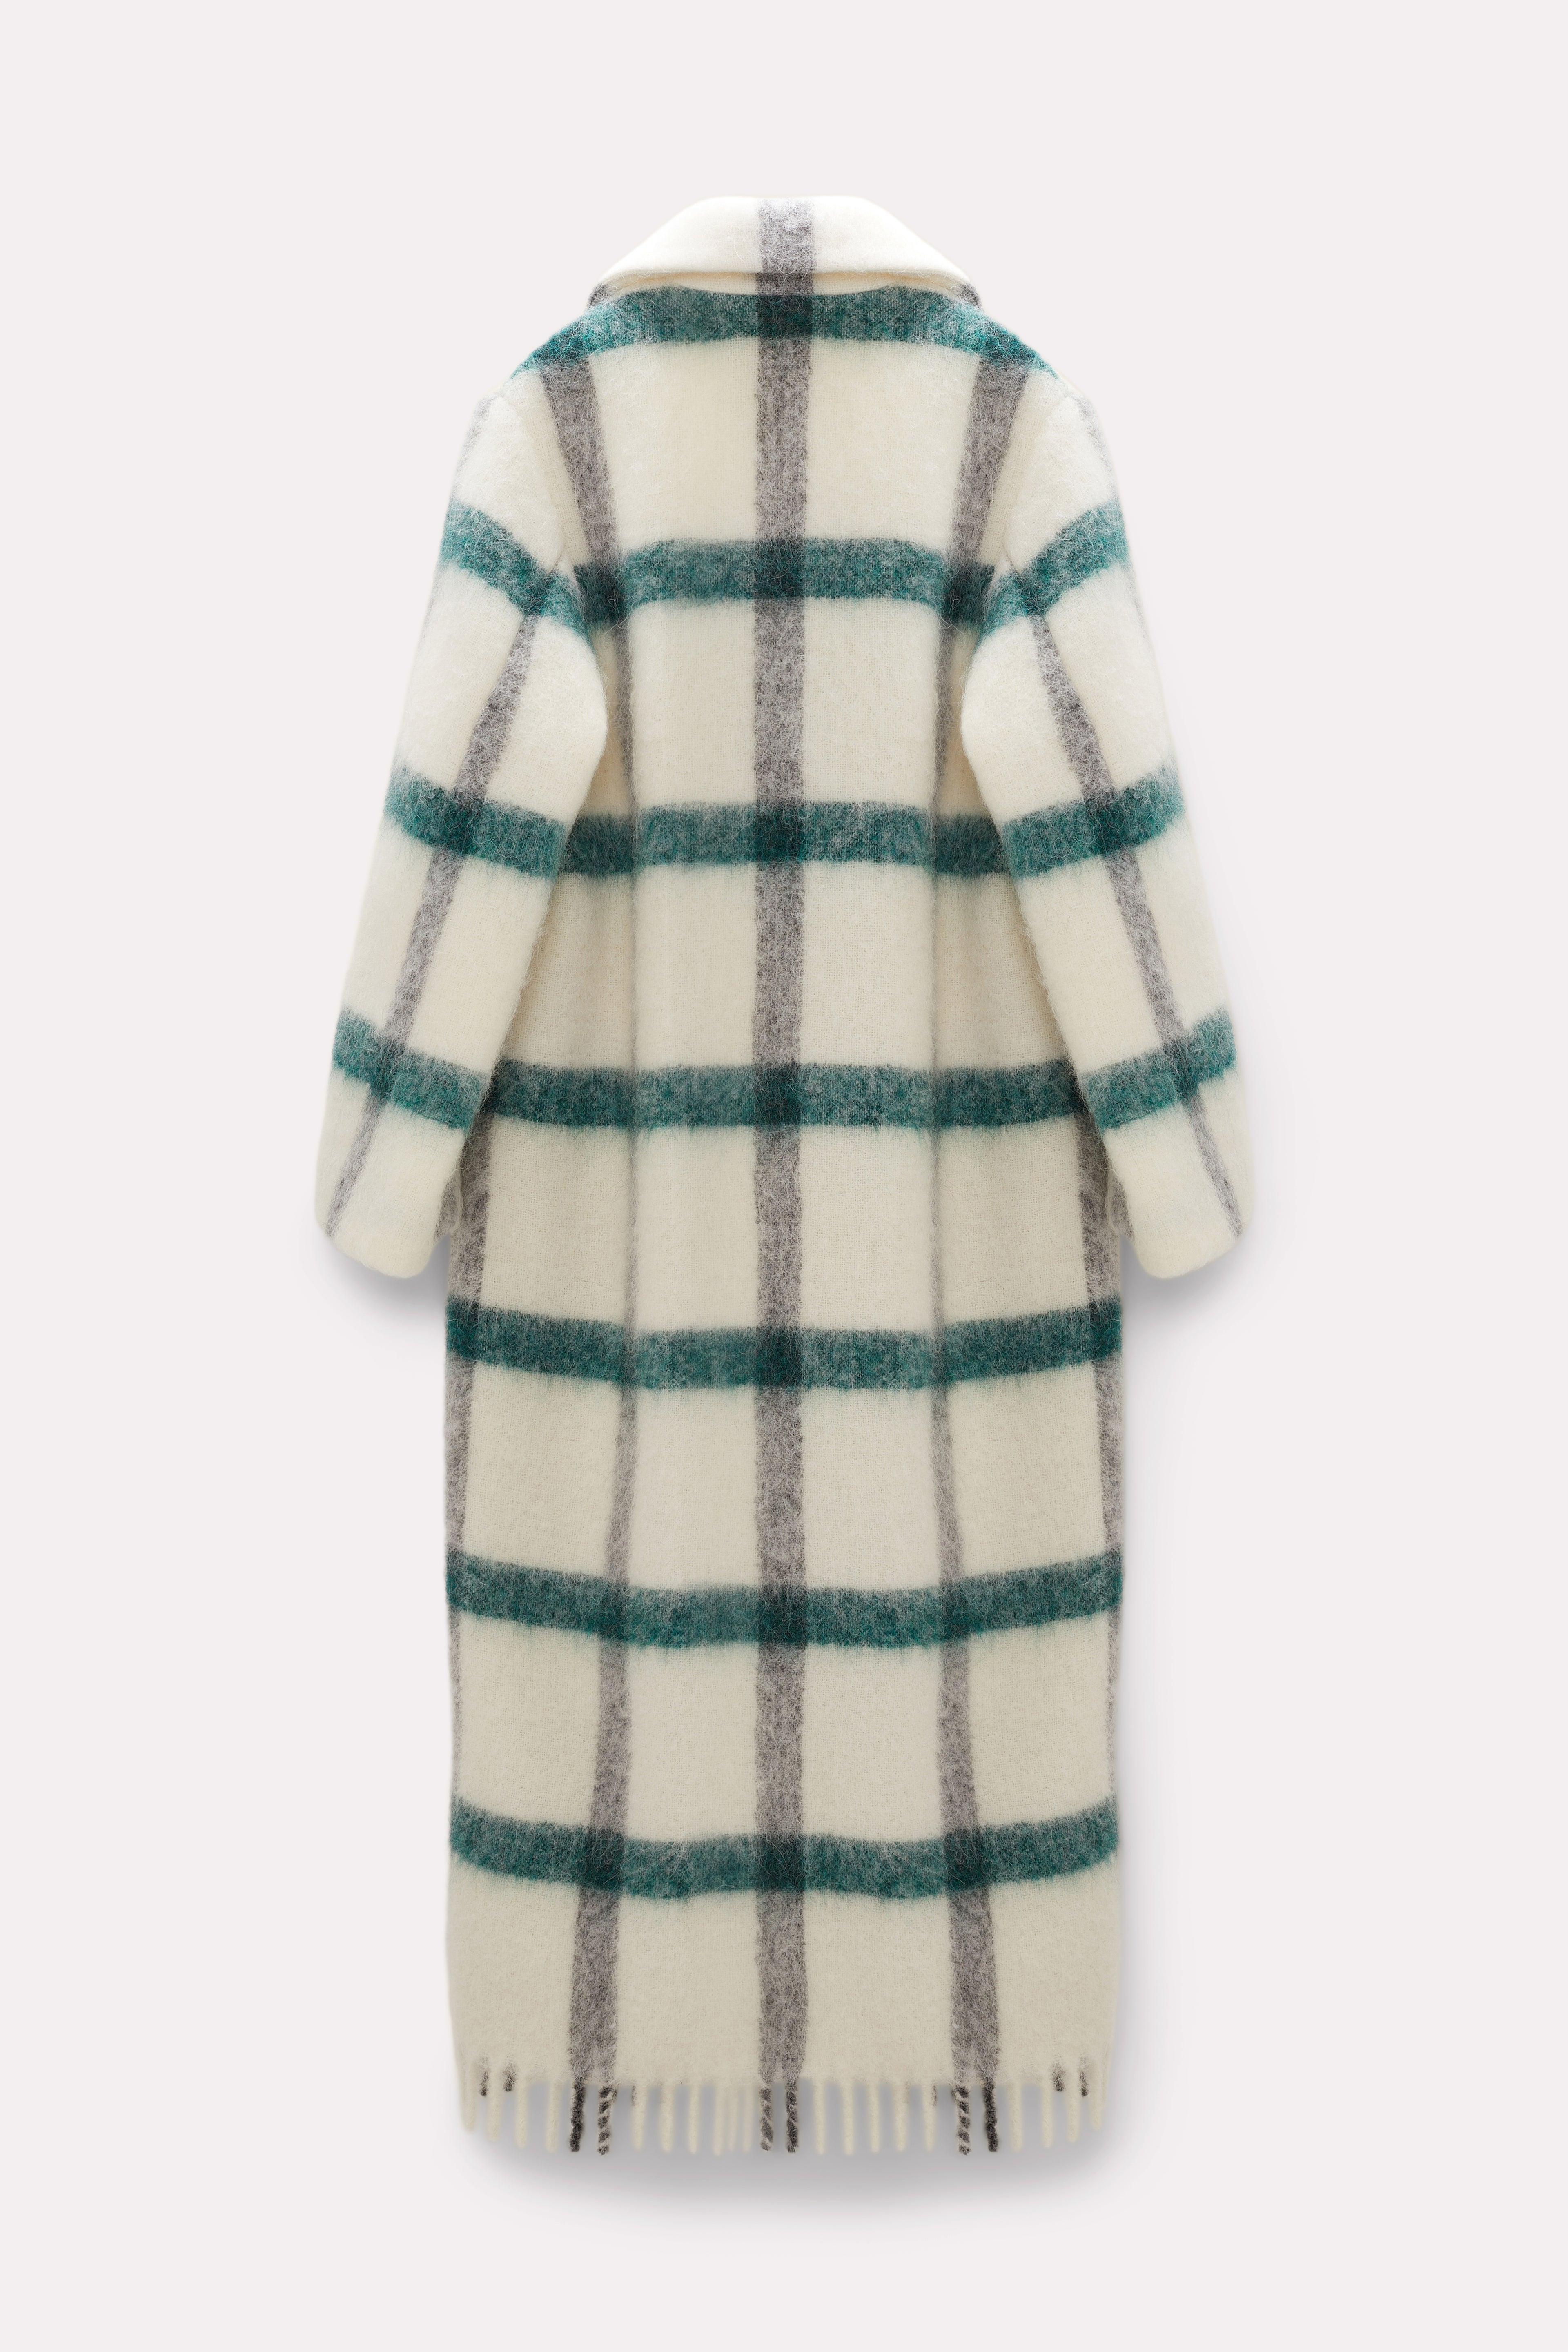 Dorothee-Schumacher-OUTLET-SALE-CHECKED-SOFTNESS-coat-Jacken-Mantel-ARCHIVE-COLLECTION-2.jpg